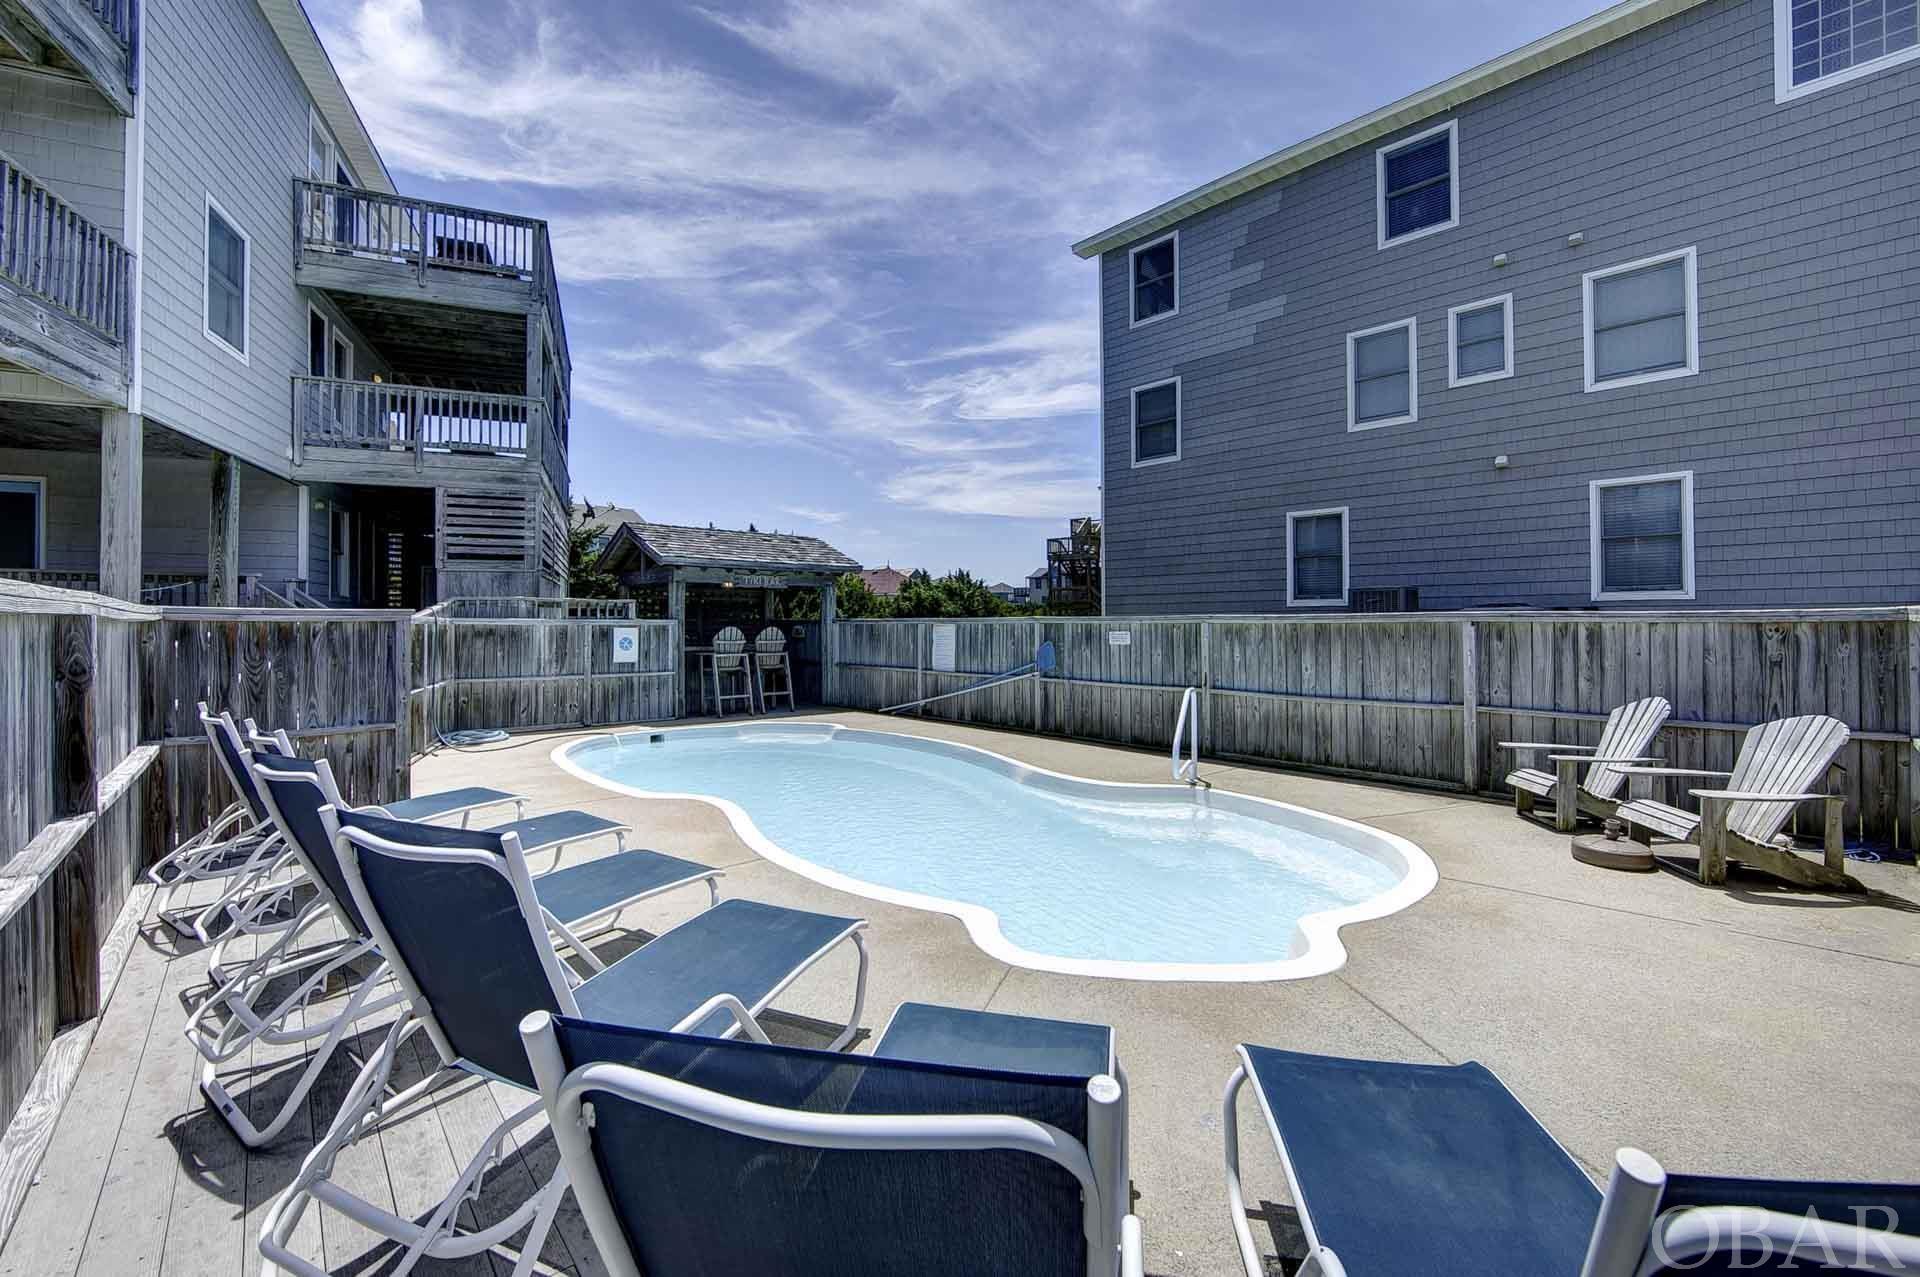 25205 Sea Isle Shores Court, Waves, NC 27982, 7 Bedrooms Bedrooms, ,6 BathroomsBathrooms,Residential,For sale,Sea Isle Shores Court,126058